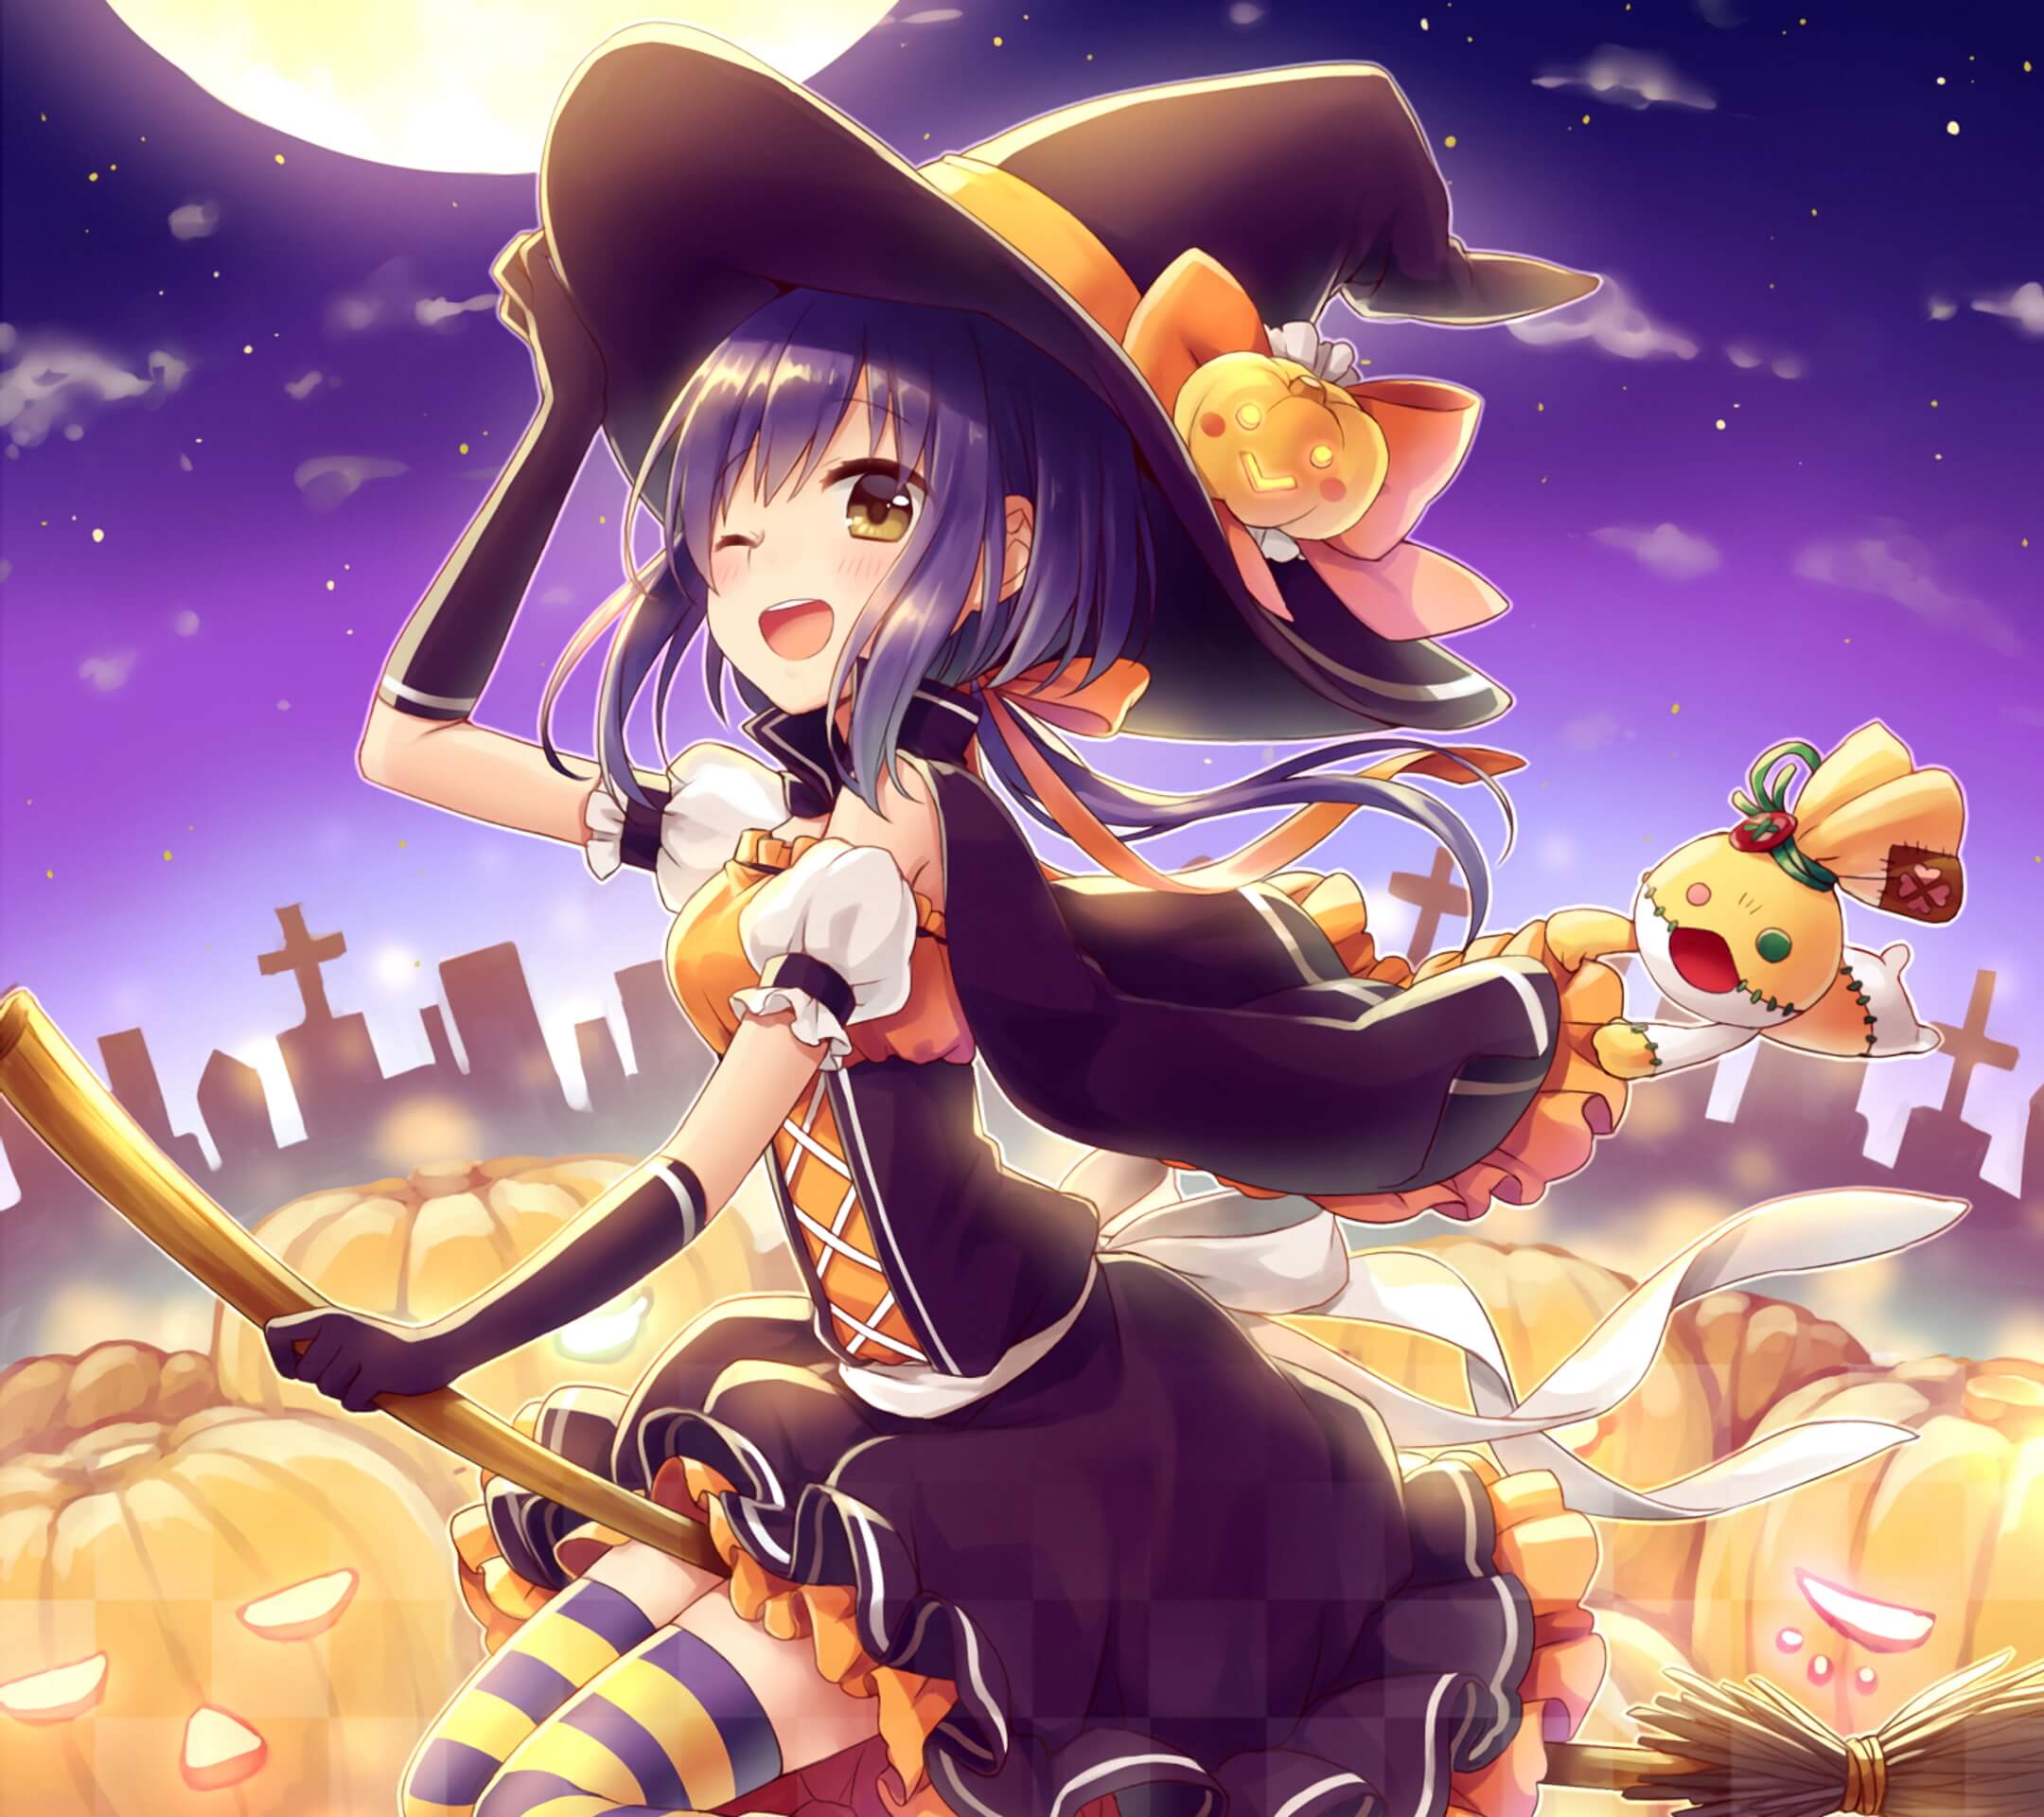 Halloween Anime.Android wallpaper 2160x1920 (4)